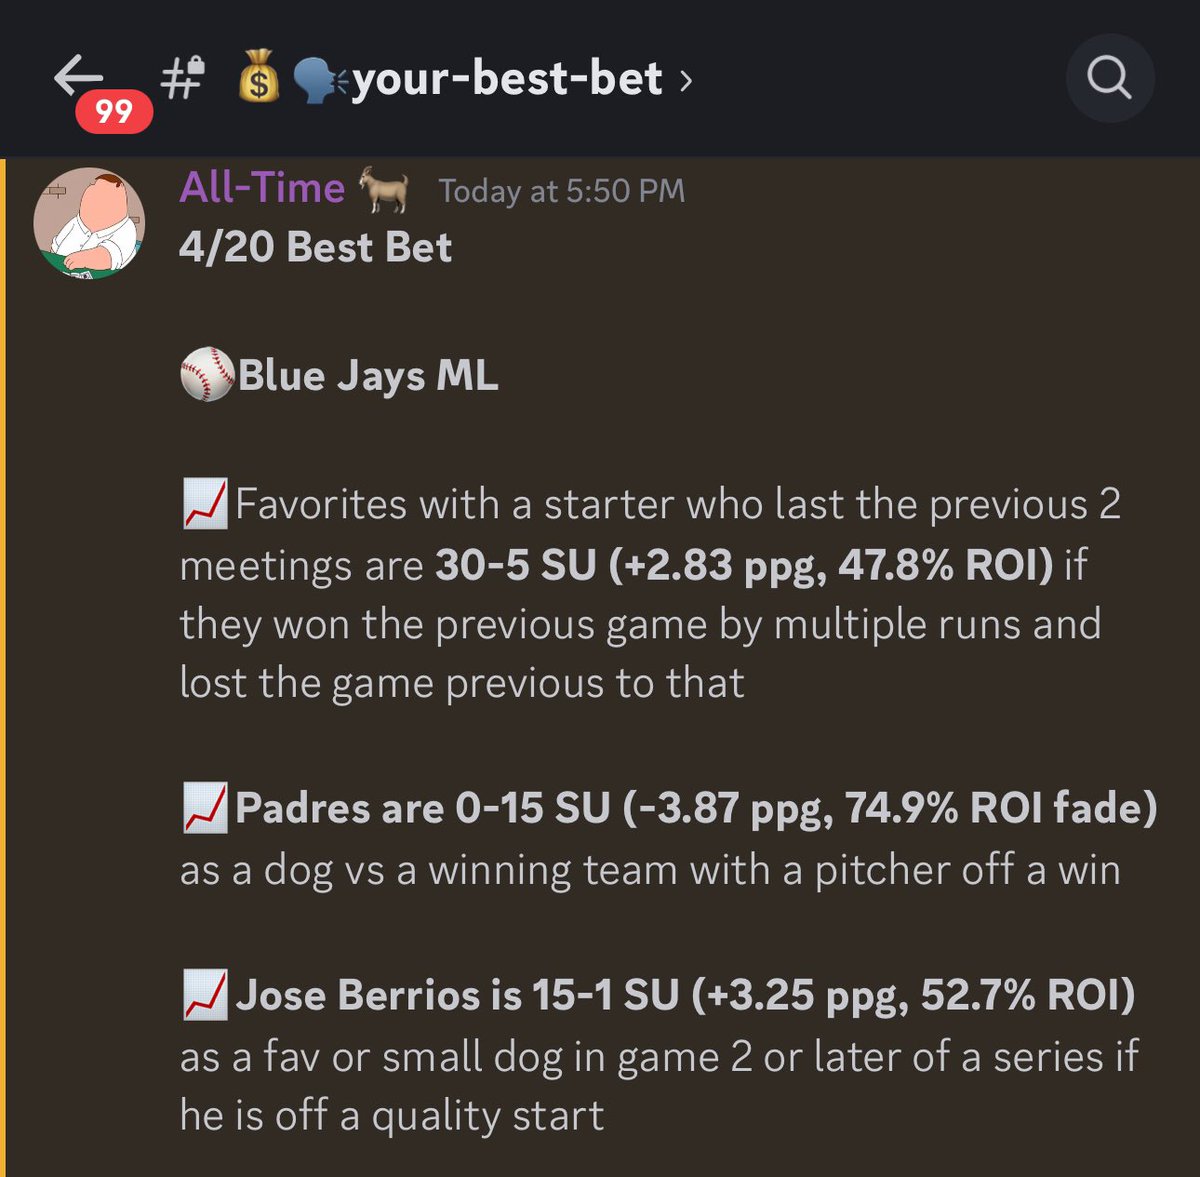 Uno Mas ! 💰💰💰💰💰 He’s on fire right now and cashes another best bet for the discord. The discord loves you @ihateyourbookie ❤️ PROMO CODE : UNO10 ($10 off) whop.com/ybbsportsdata/…